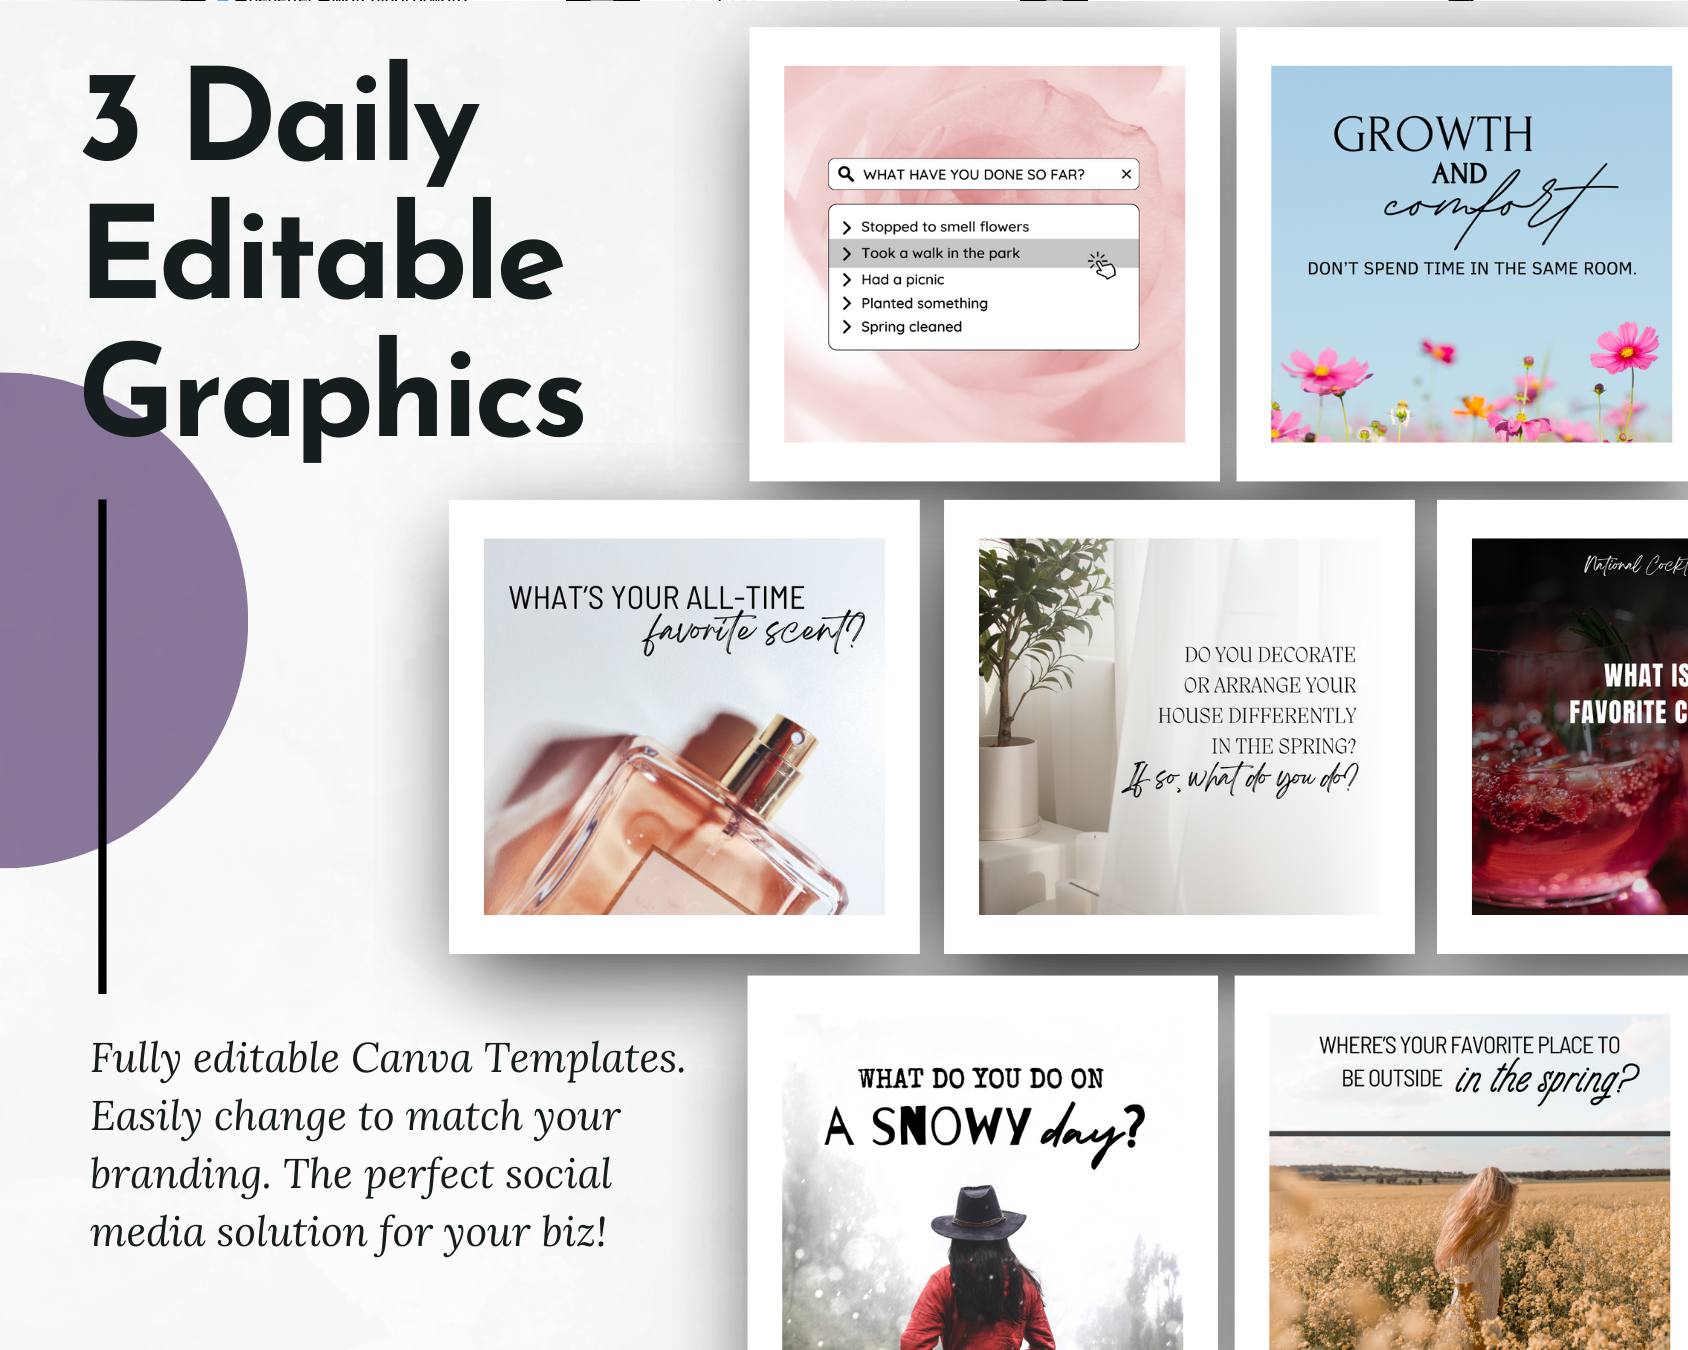 Get ready to propel your business with the March Daily Posting Plan - Your Social Plan by Get Socially Inclined. These eye-catching visuals are sure to boost engagement and take your online presence to the next level.